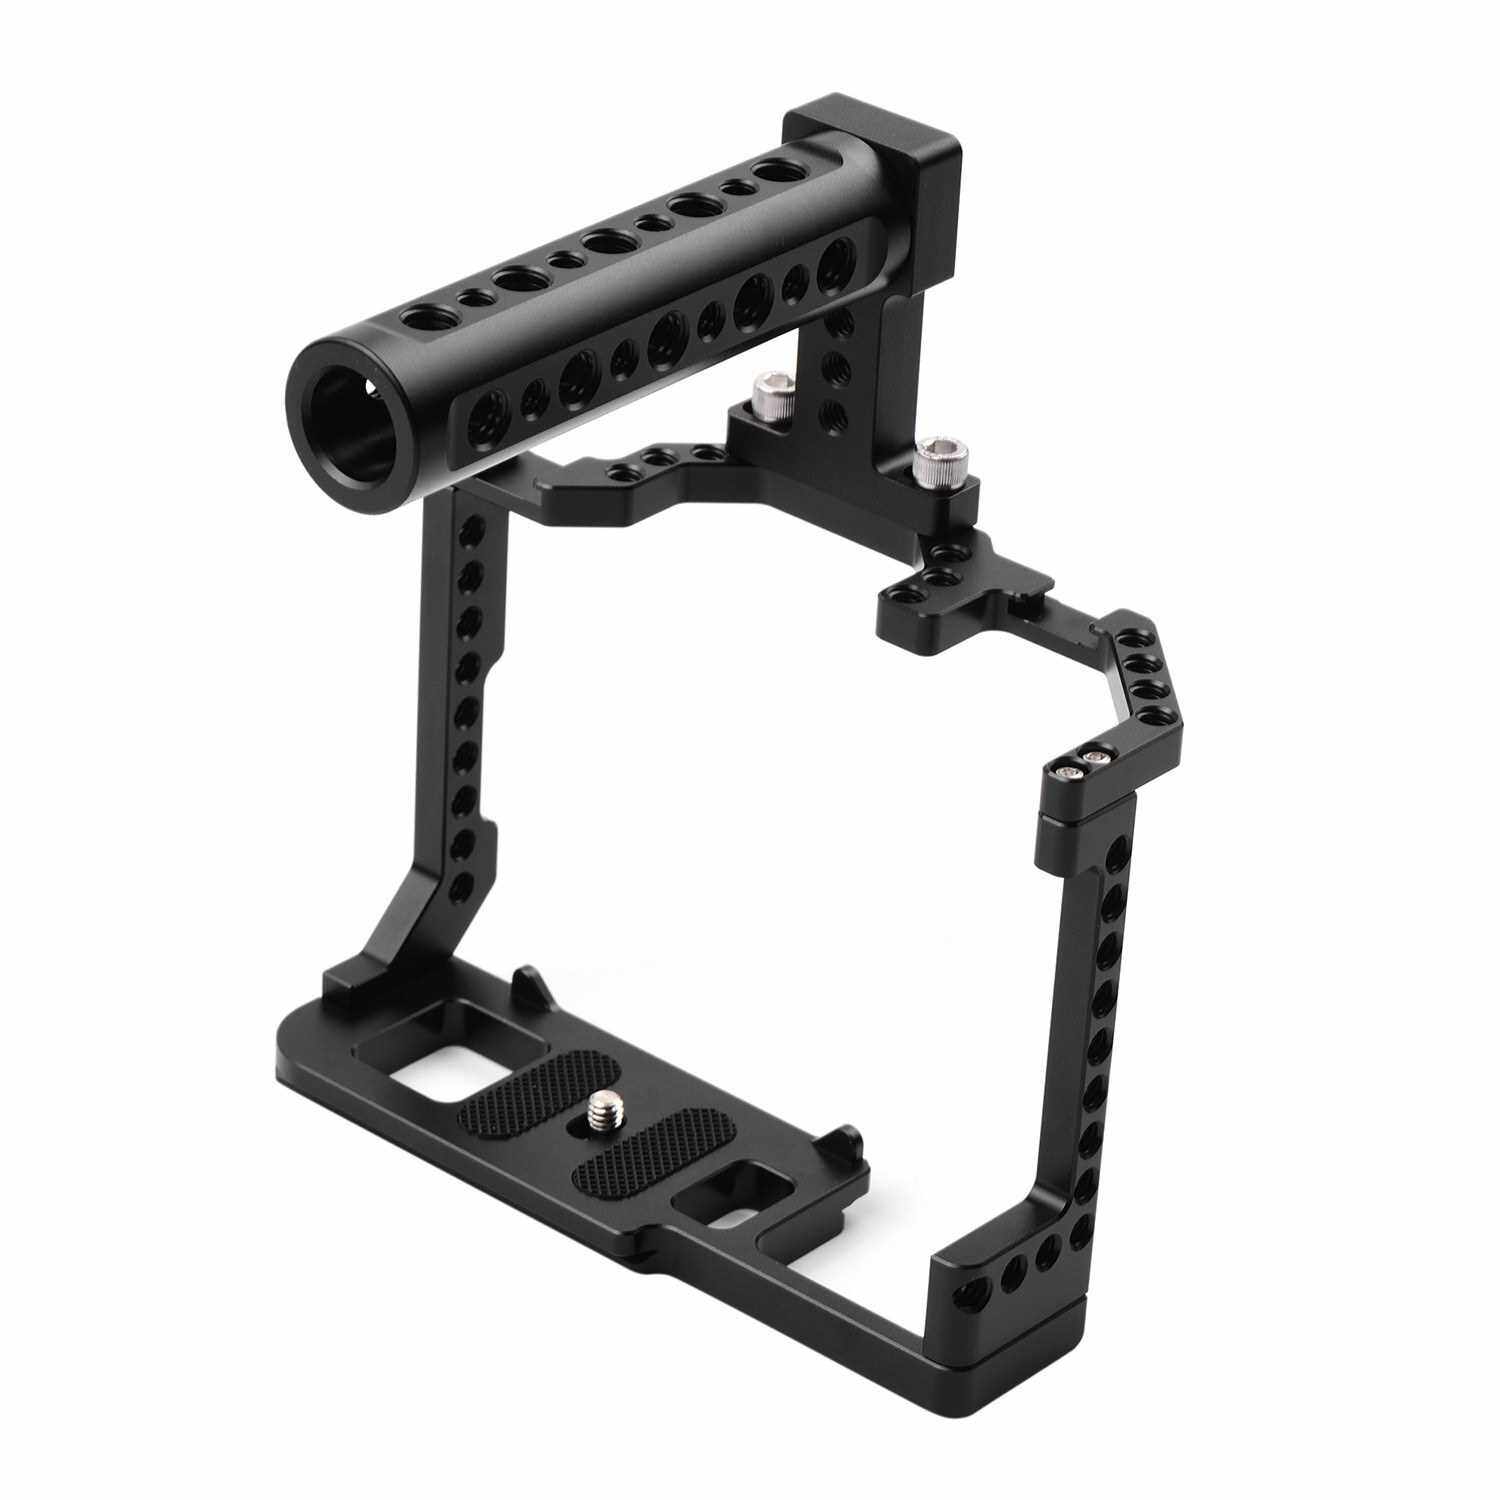 Andoer Camera Cage + Top Handle Kit Aluminum Alloy with Dual Cold Shoe Mount 1/4 Inch Screw Compatible with Canon EOS 90D/80D/70D DSLR Camera (Standard)